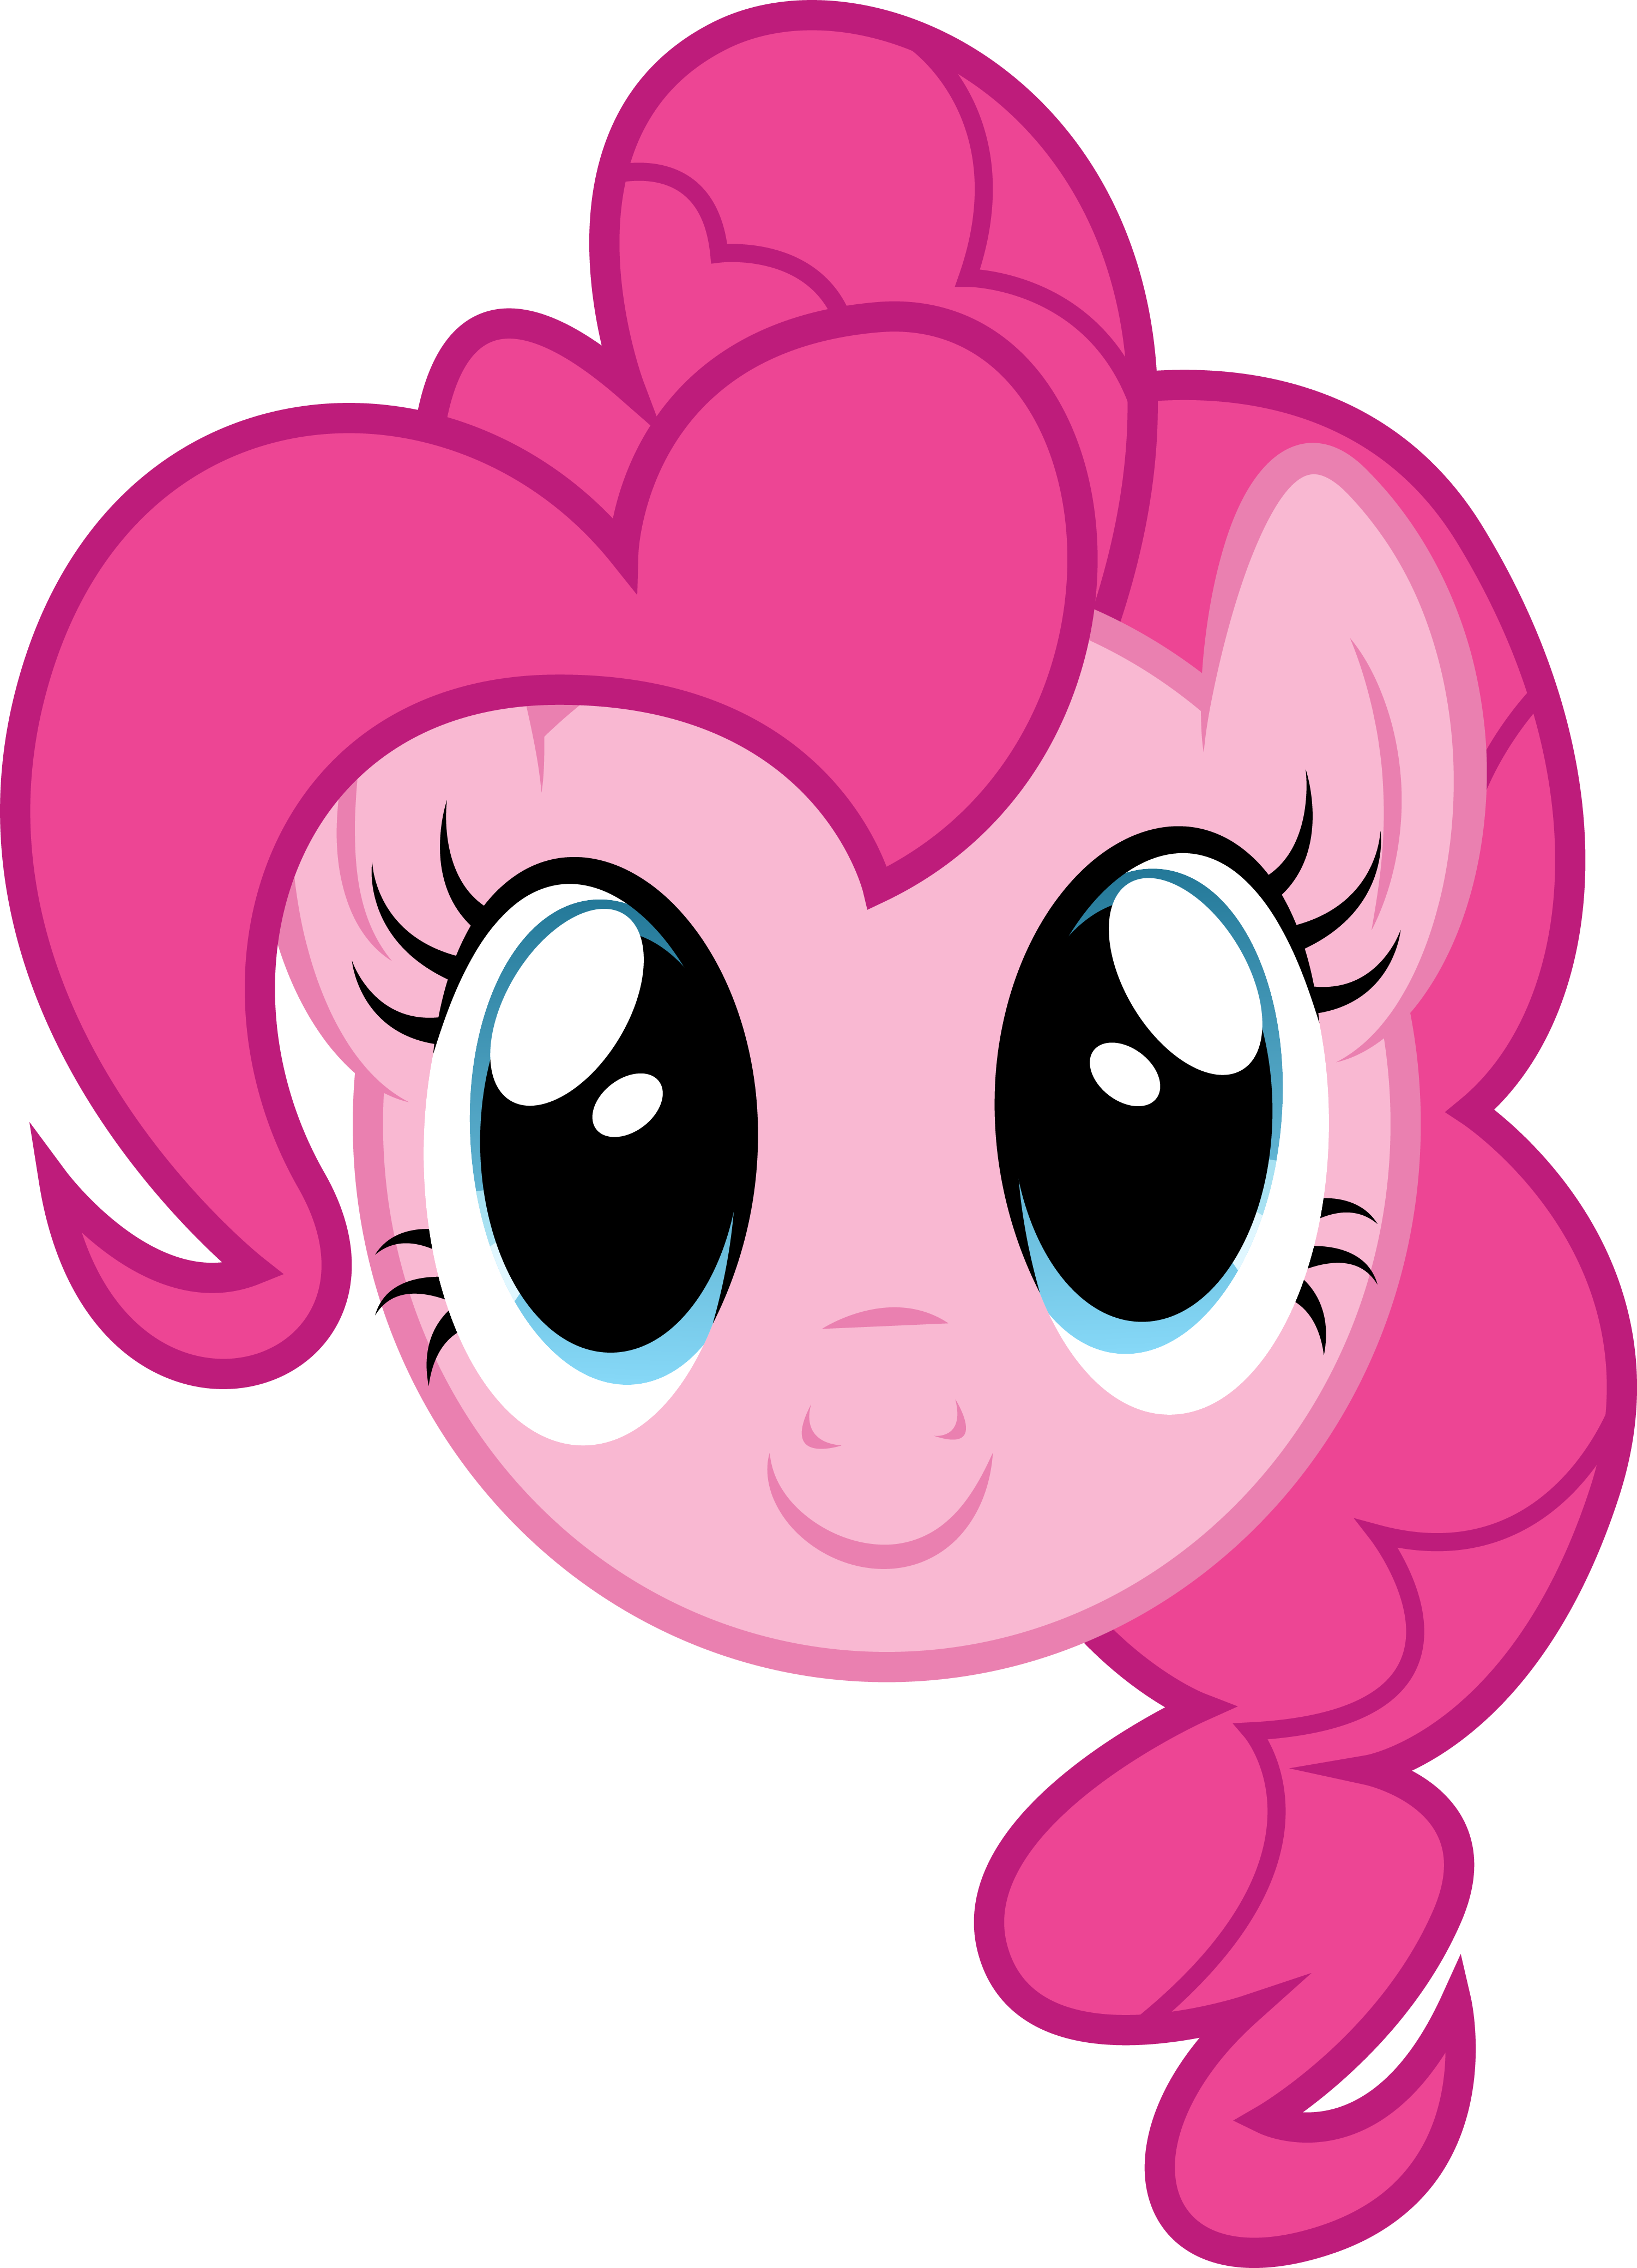 Pinkie Pie Face by PaulySentry on DeviantArt